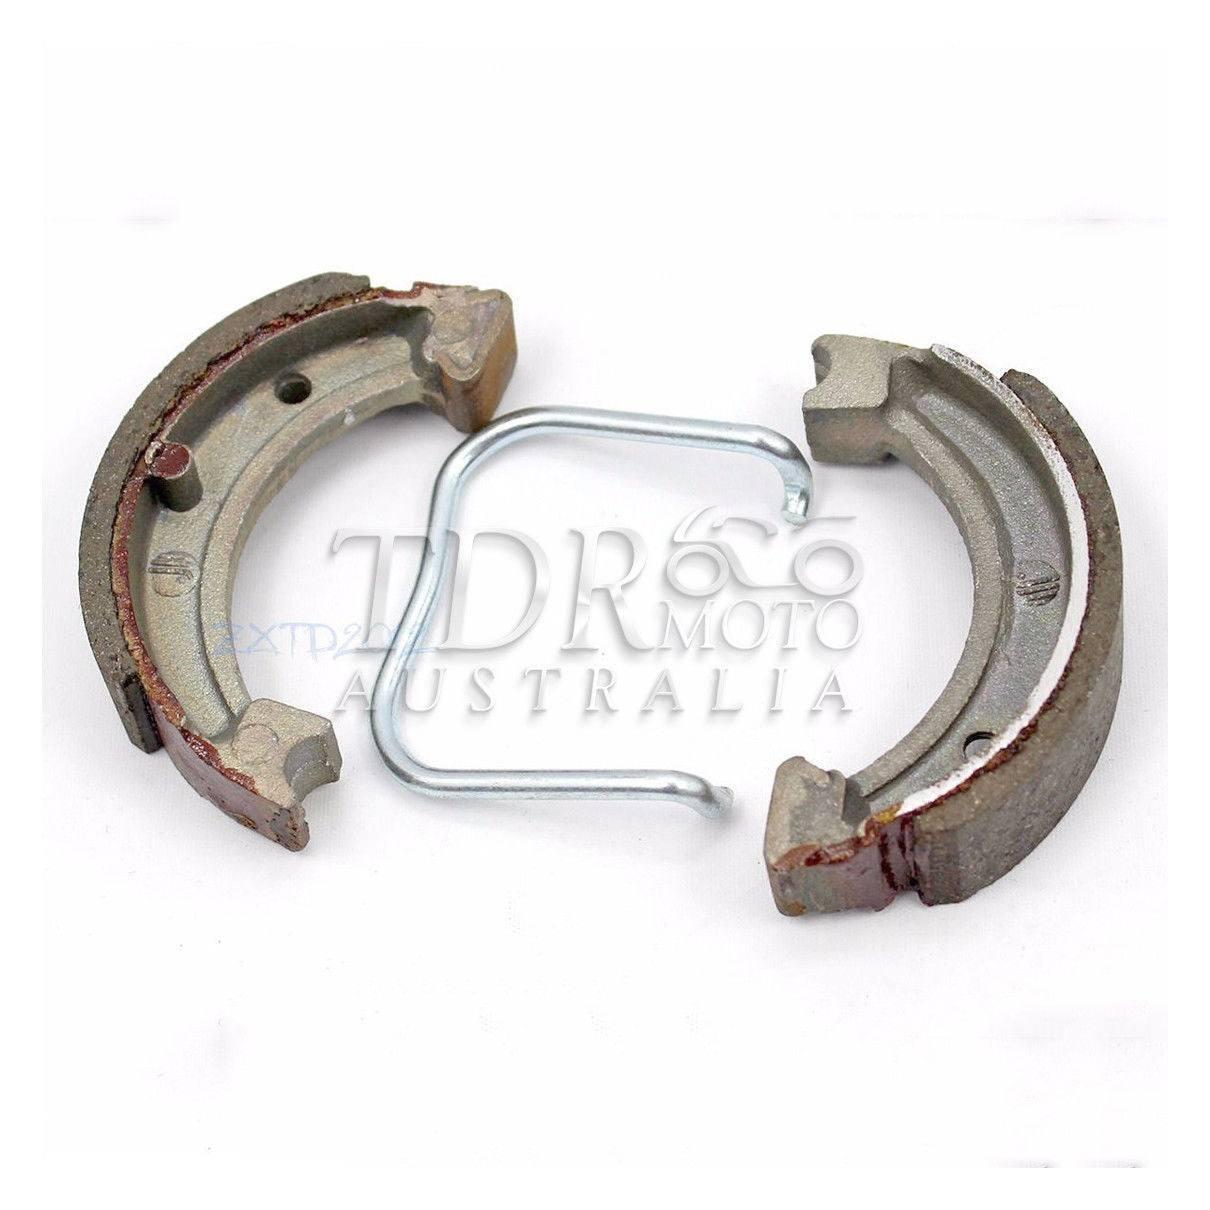 For PW50 Yamaha Brake Shoes Pads - Suit Front Or Rear PY50 Yzinger Peewee 50 50cc